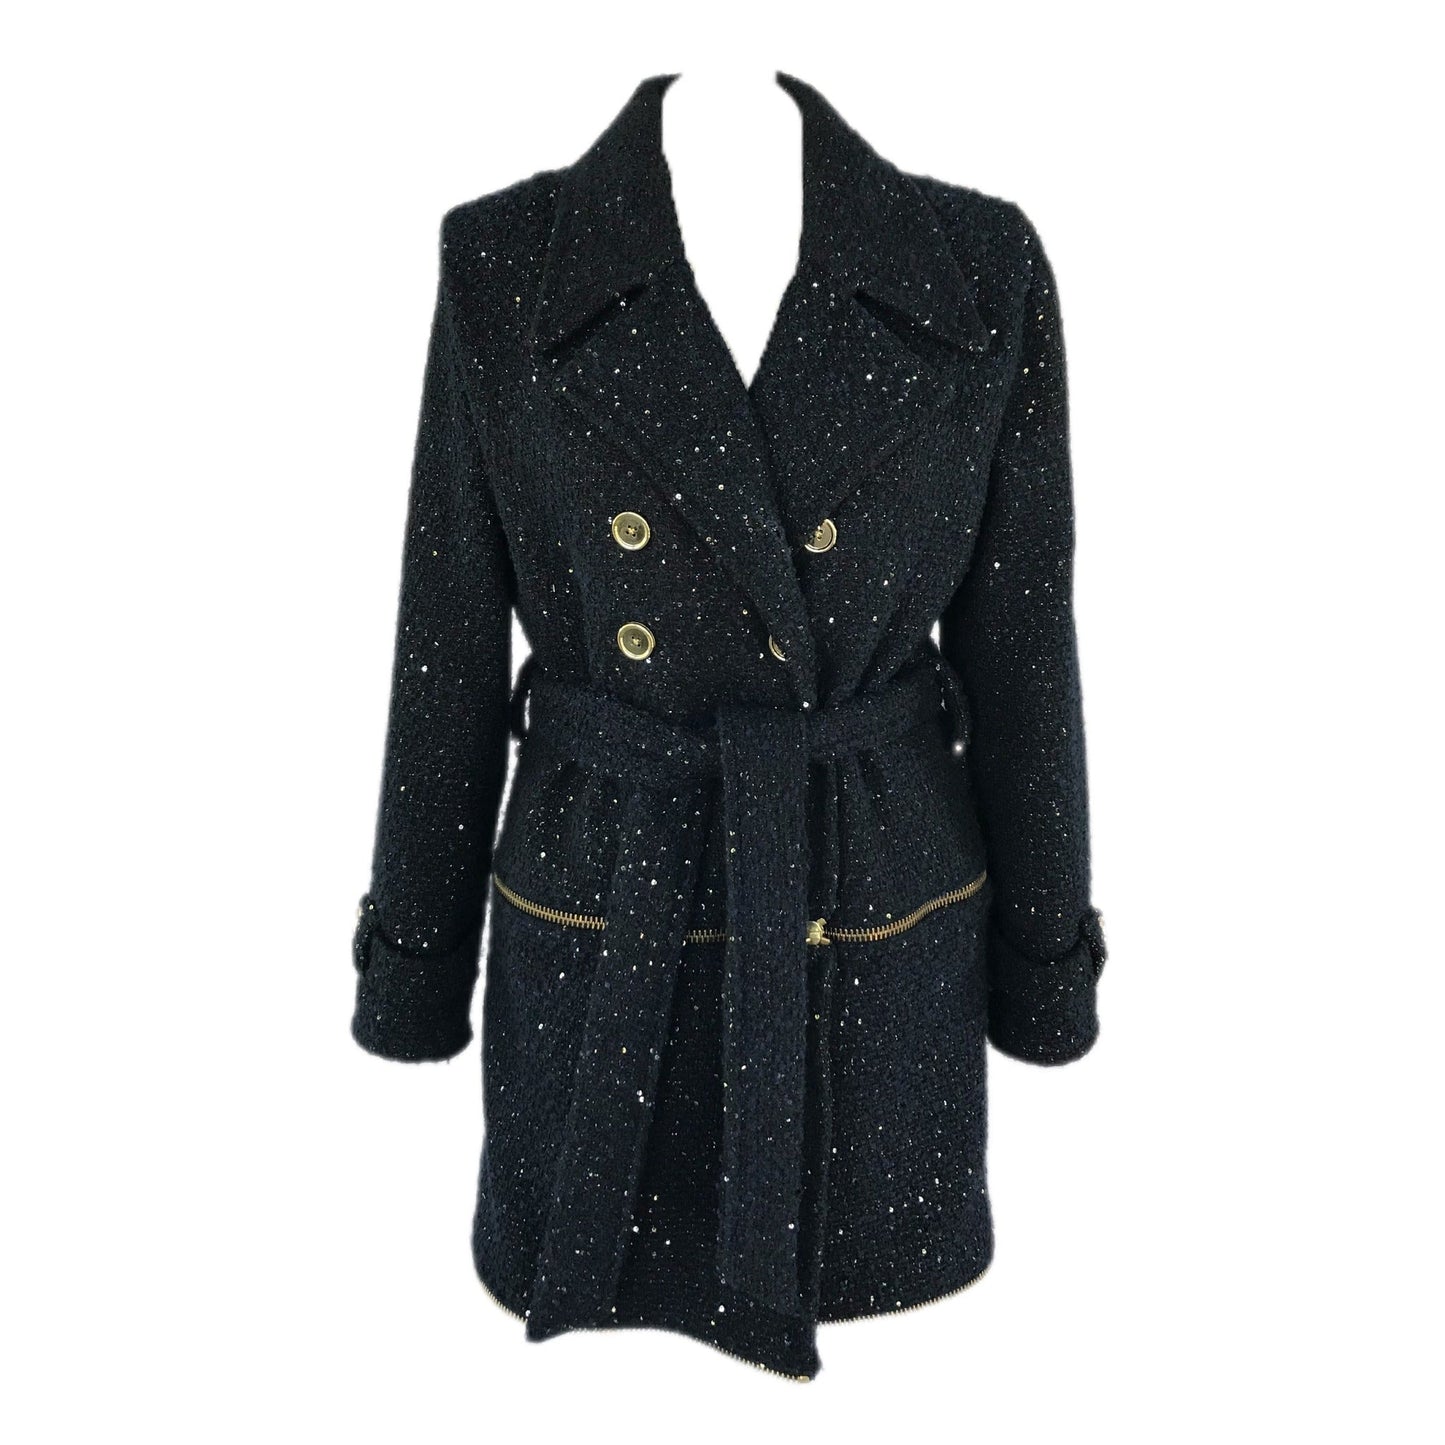 Women's 3-Part Midnight Boucle Trench Coat - Transforming Design